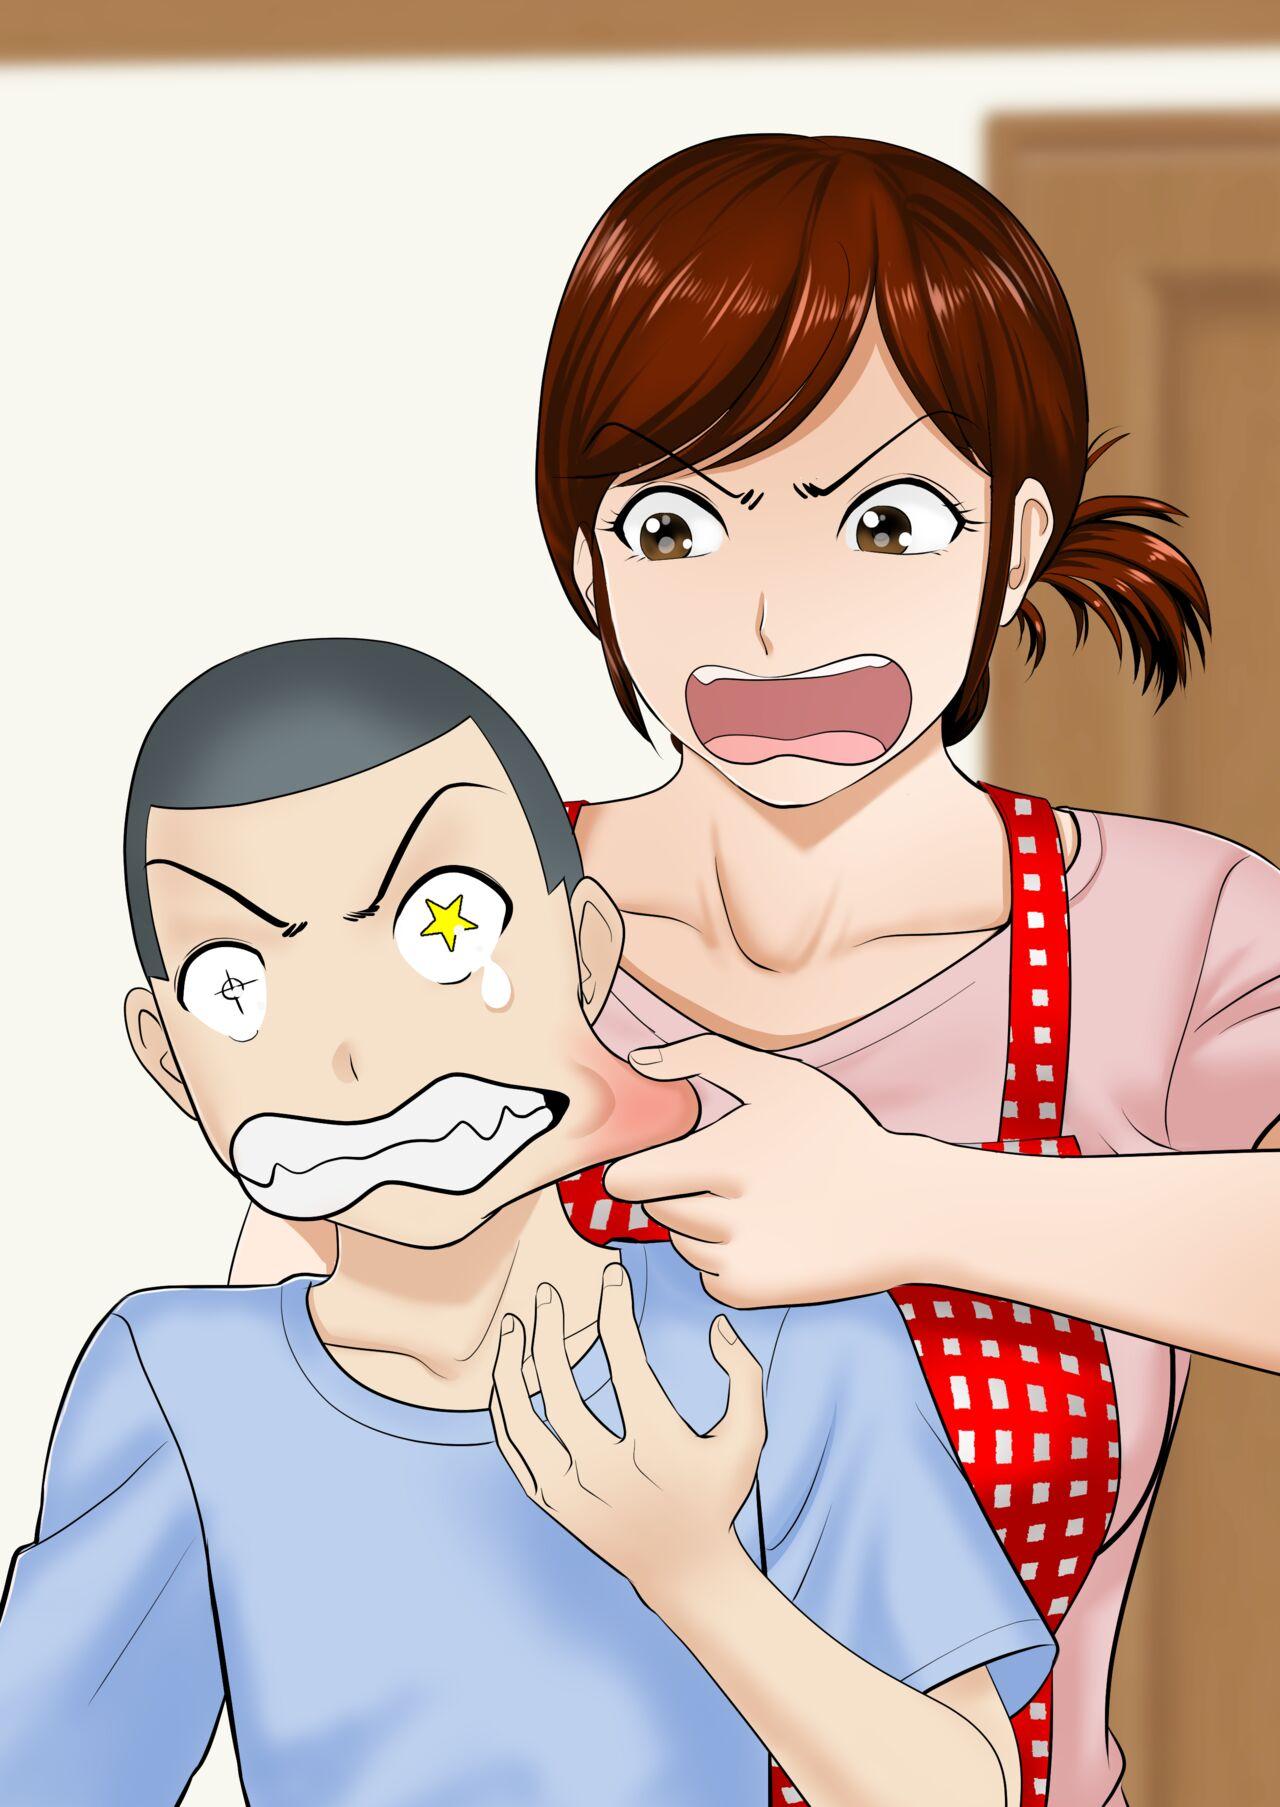 Anal Gape [Fuwatoro Opanchu Cake] 30-nichi go ni SEX suru ~Haha to Musuko~|After 30 Days I'll Have Sex ~Mother and Son~[English][Amoskandy] - Original Brother Sister - Picture 2